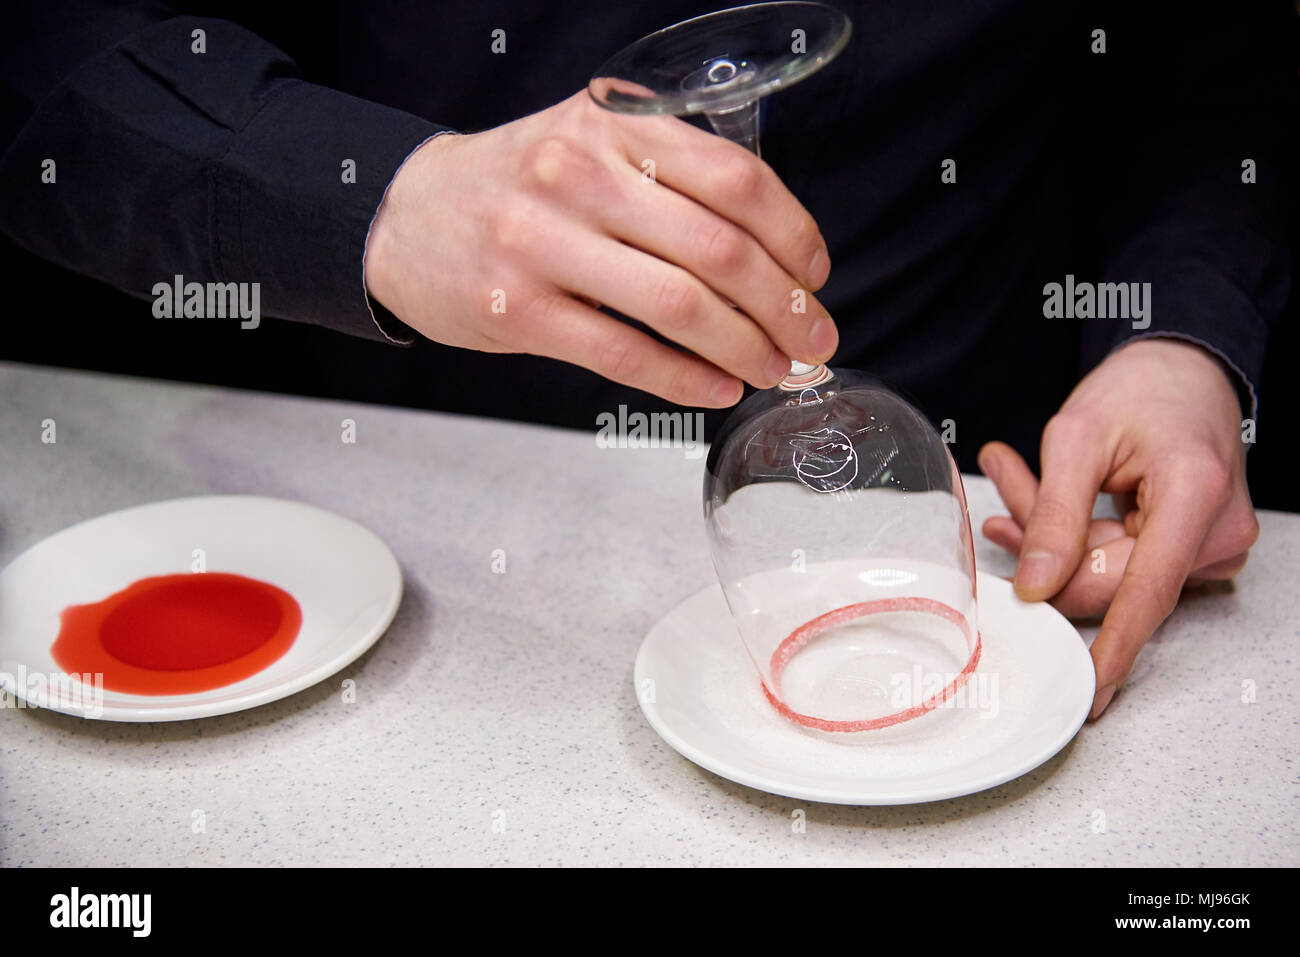 Inverted glass of the barman is lowered into a plate with sugar crumbs Stock Photo